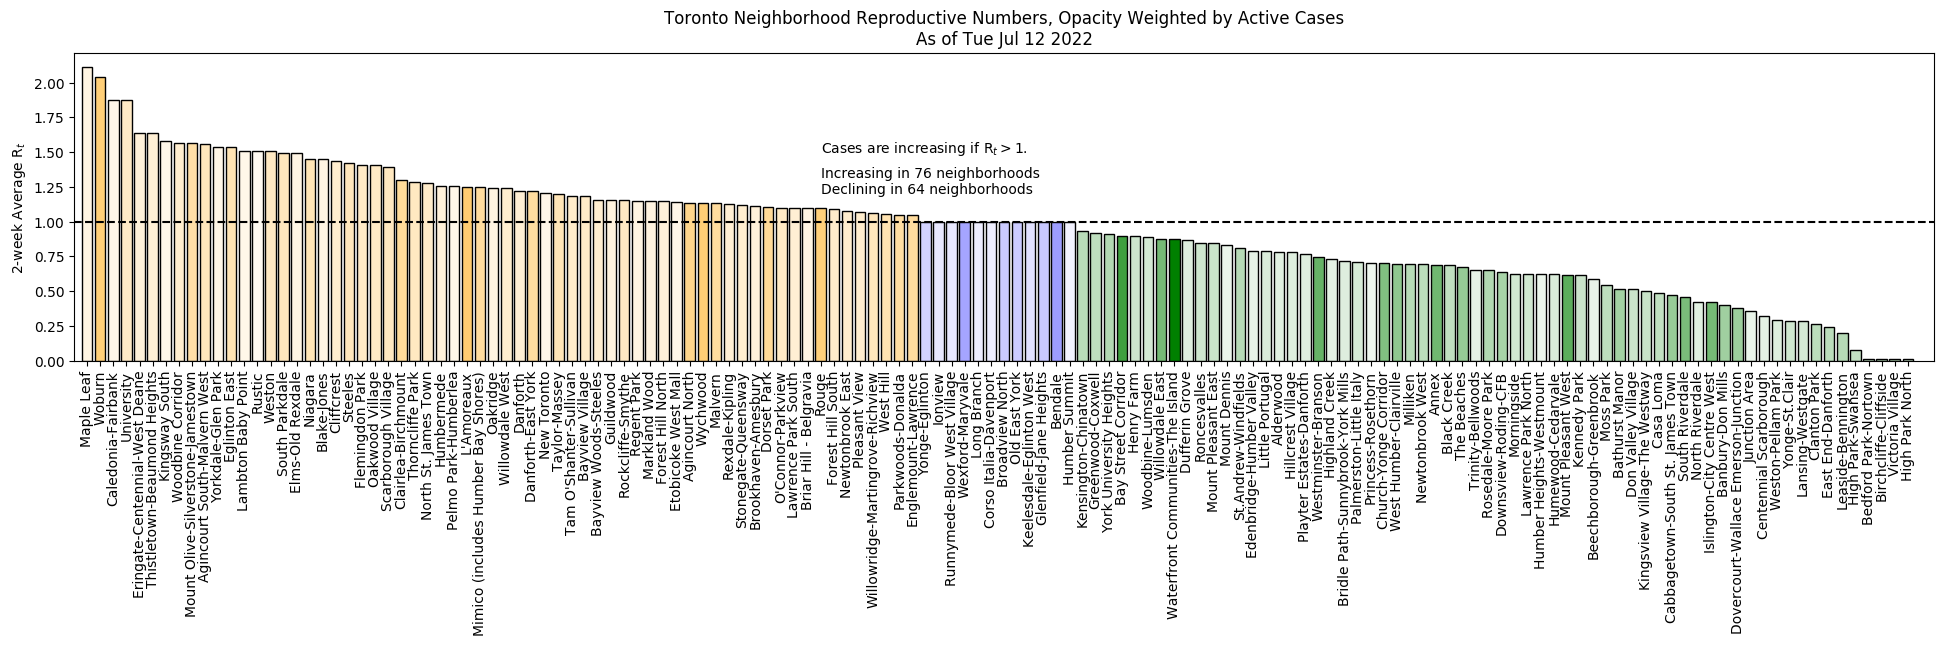 Current effective reproductive numbers for all Toronto neighborhoods, with opacity weighted by current active cases.